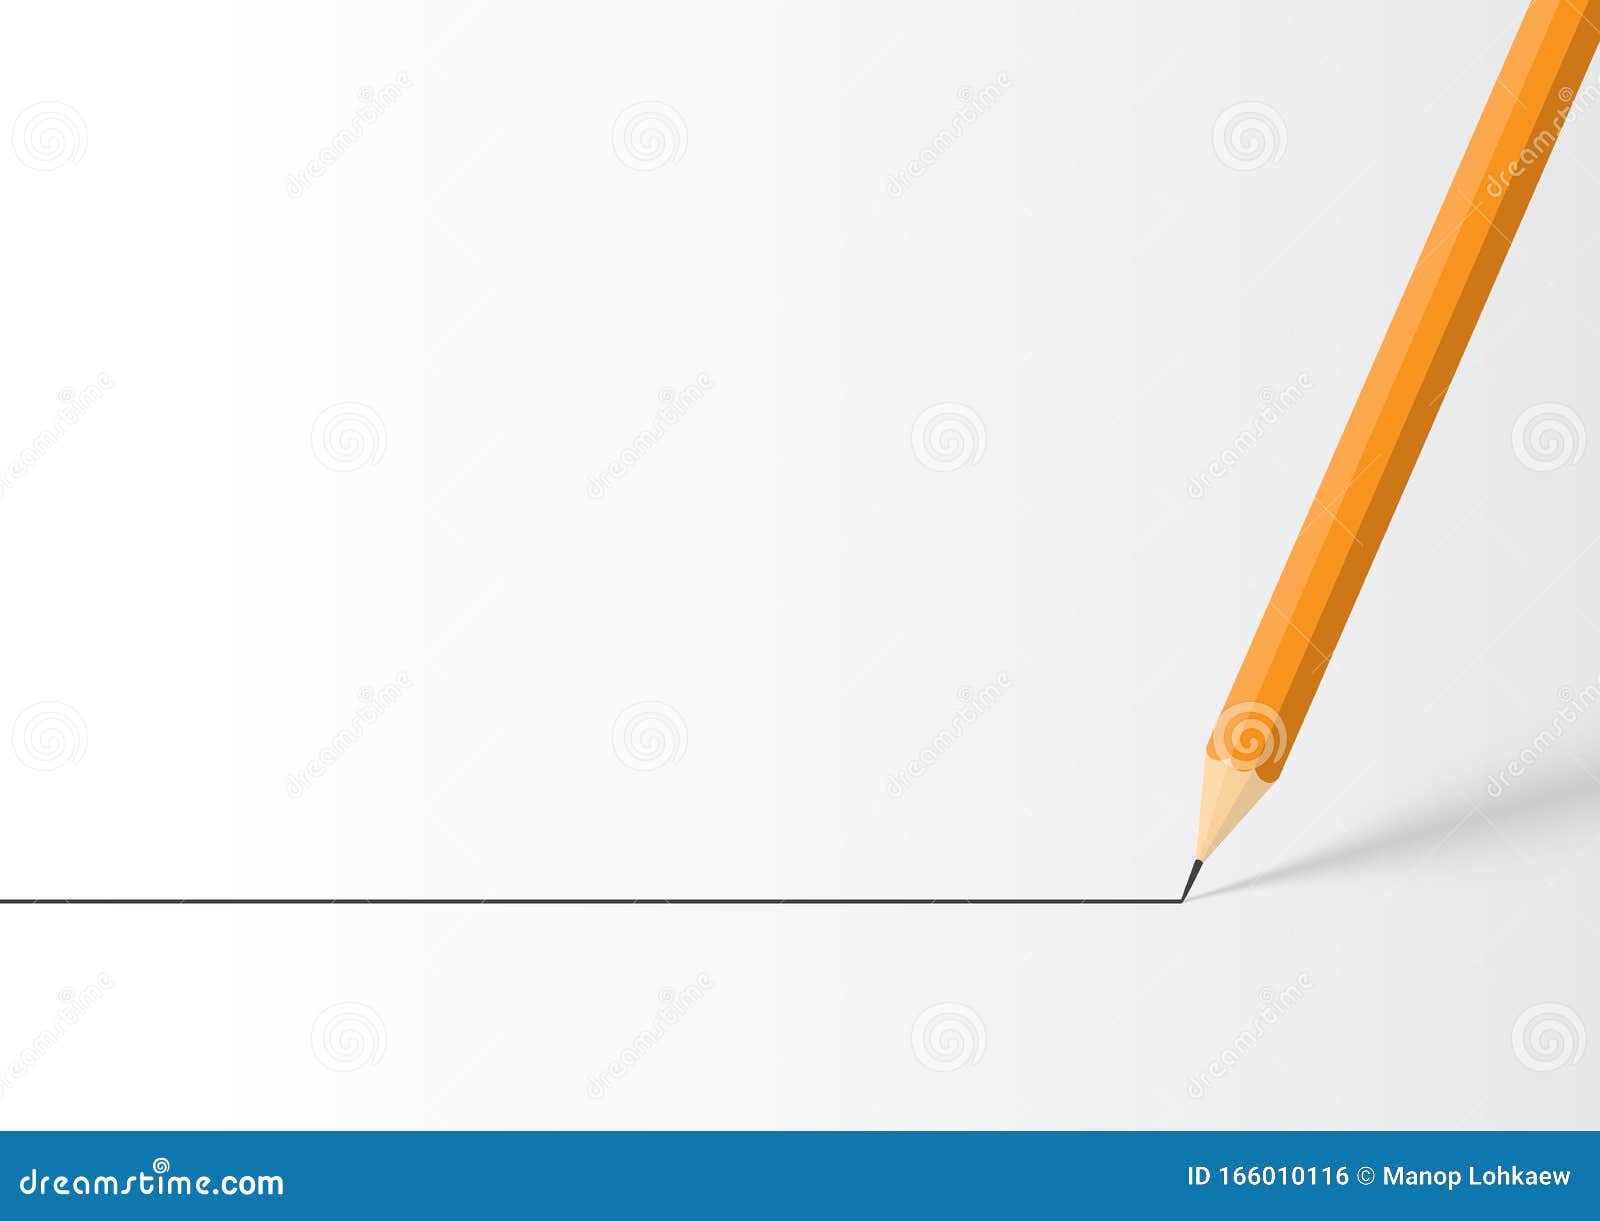 pencil drawing straight line on white background